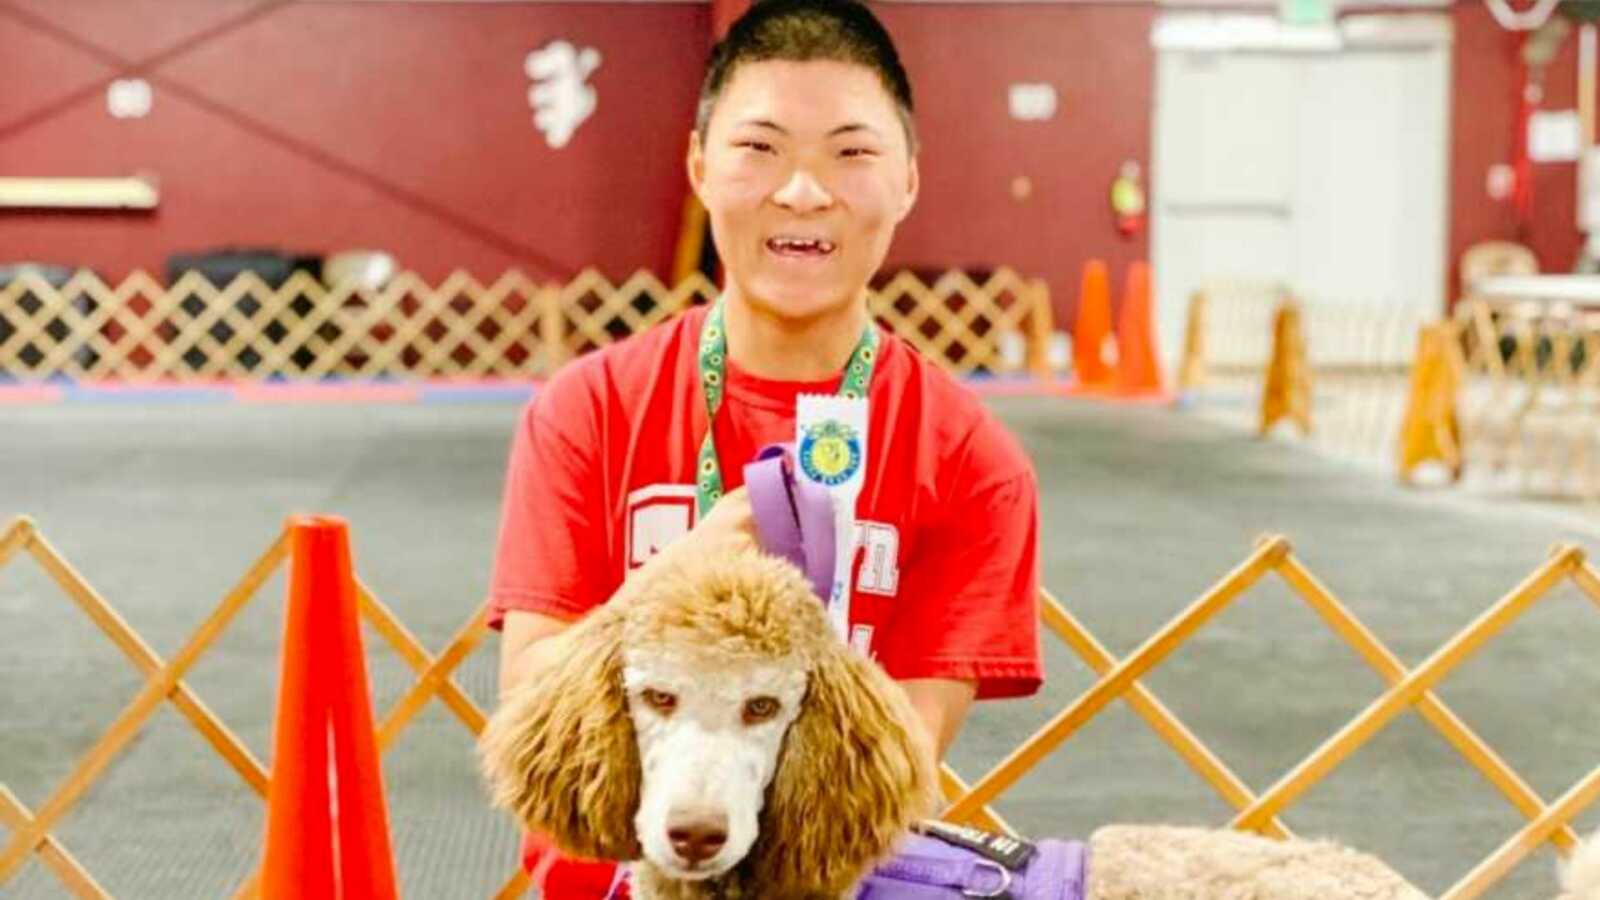 Teen with fetal alcohol spectrum disorder smiles with service dog